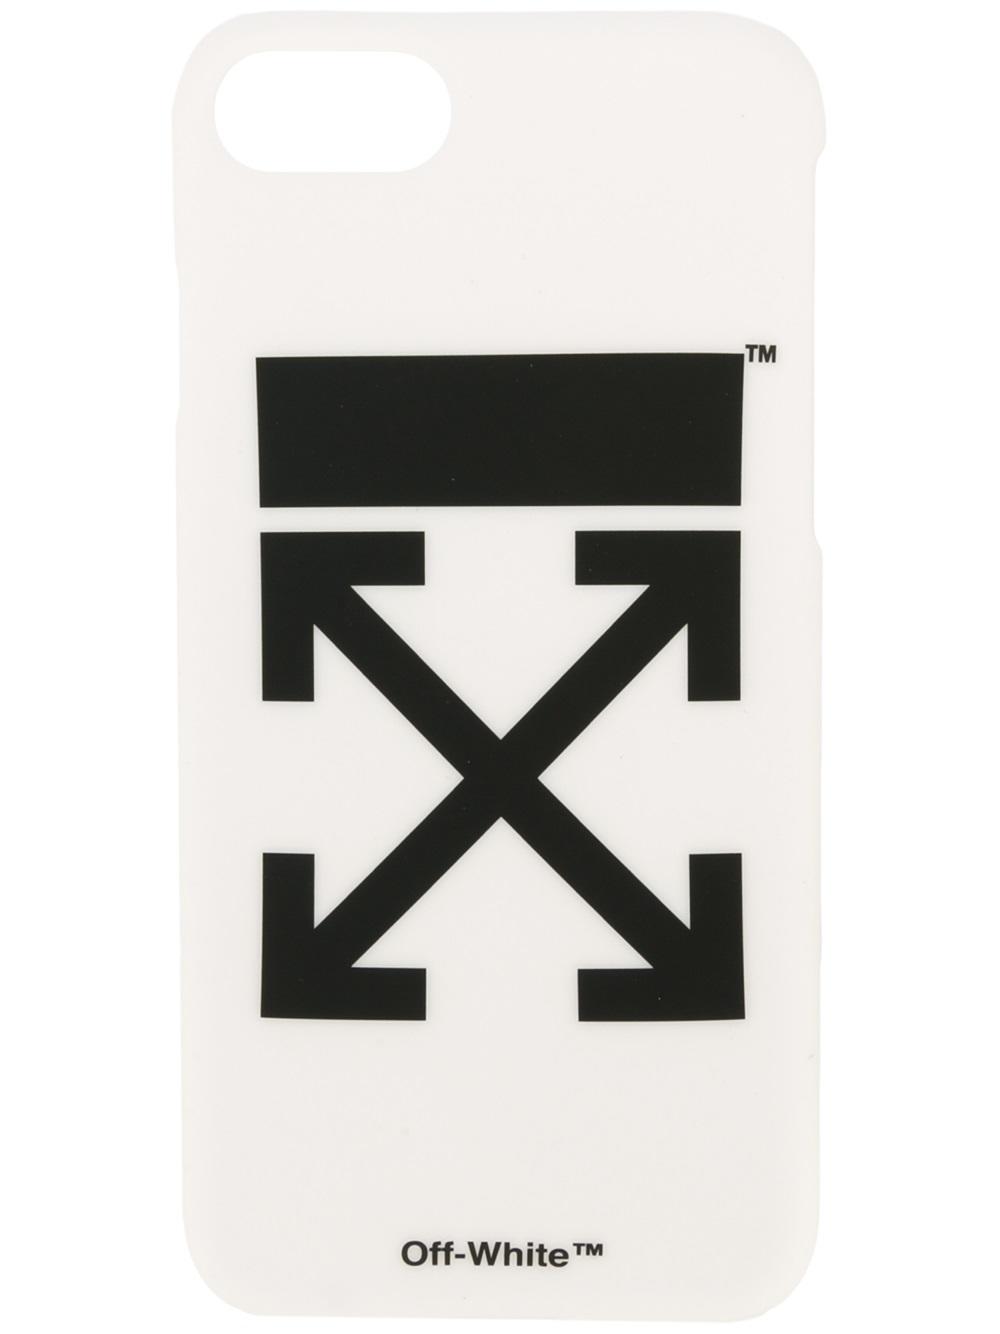 Off-White Arrows iPhone 7 case 0110 WHITE Men Lifestyle Phone Computer & Gadgets